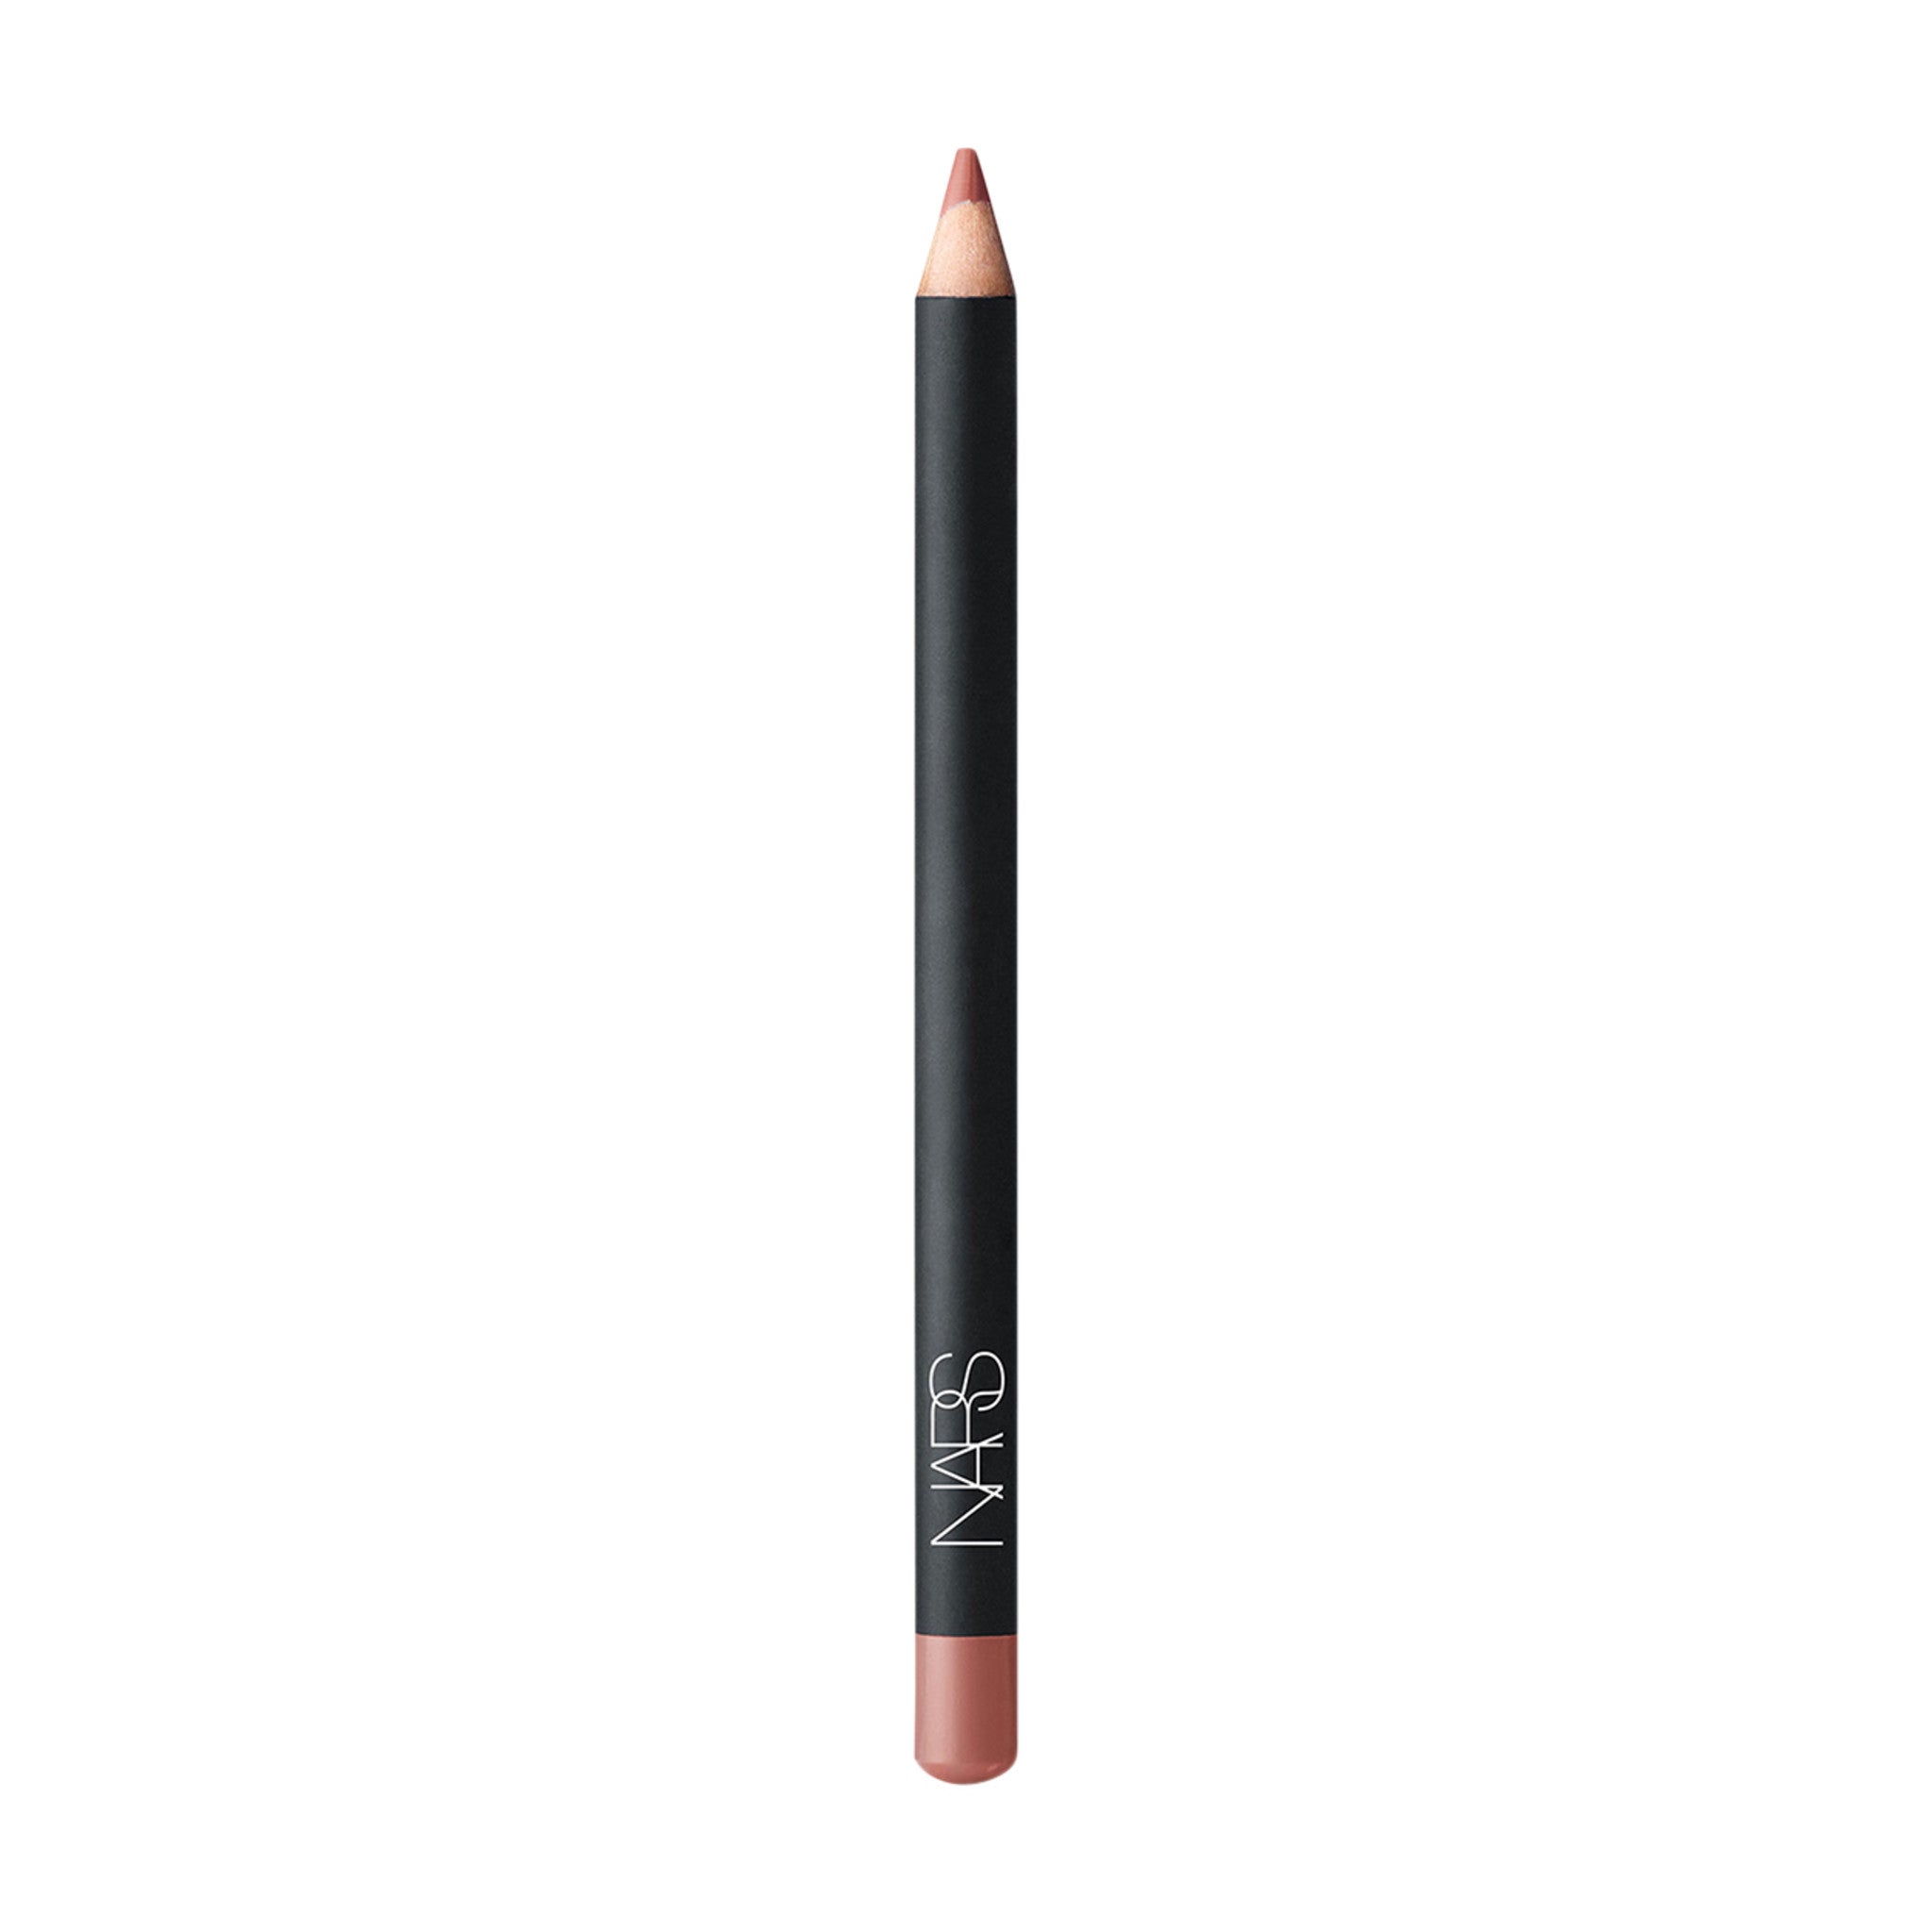 Nars Precision Lip Liner Color/Shade variant: HALONG BAY main image. This product is in the color coral